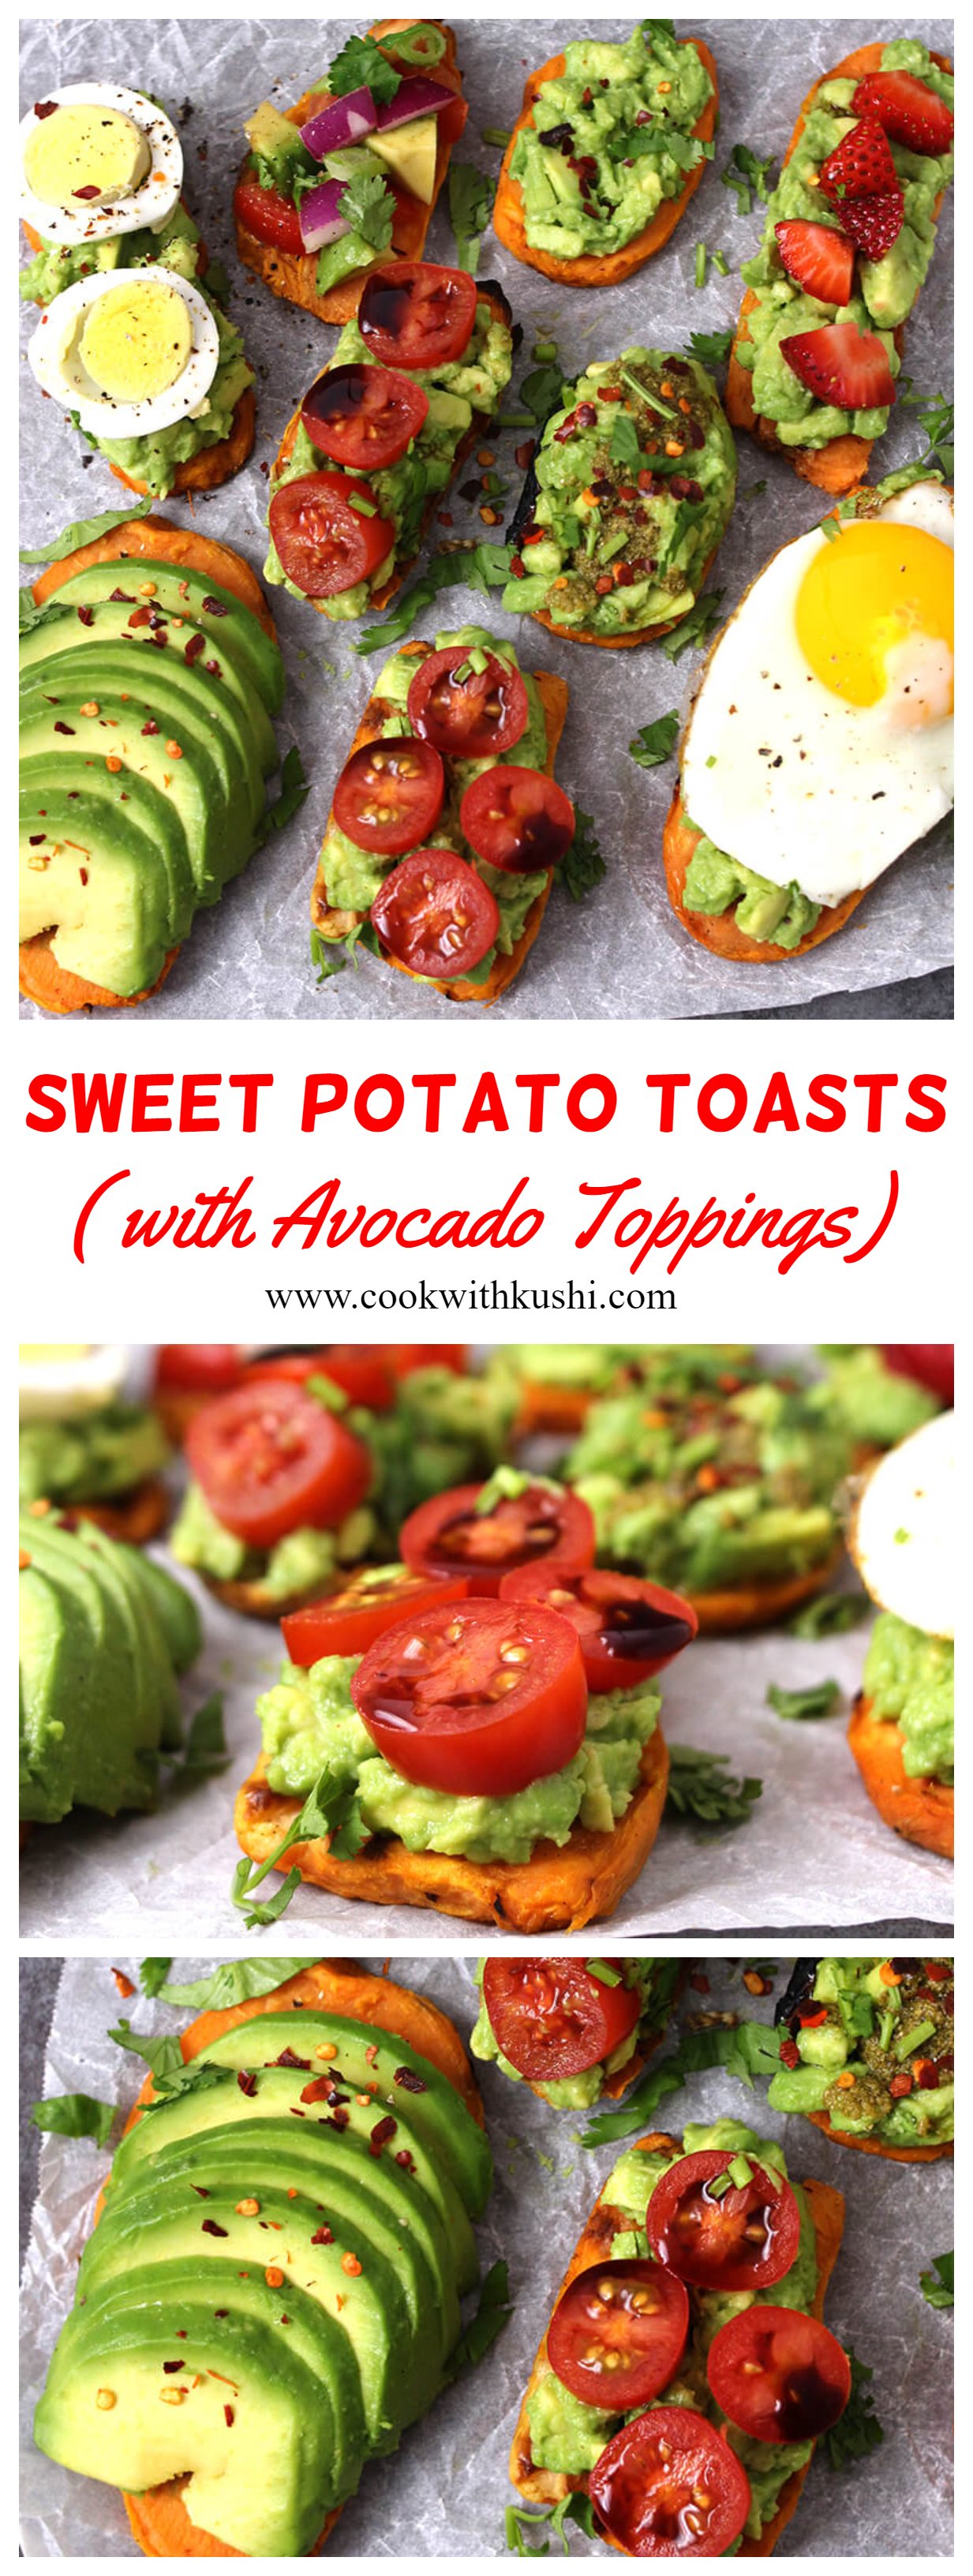 Sweet Potato Toasts are healthy and delicious, quick and also the best alternative to the bread toasts. These are ready in less than 10 minutes. #SweetPotatoToasts #EggToasts #ToastToppings #AvocadoToastToppings #AvocadoToastwithegg #DietFood #Weightlossfood #lunchboxrecipes #kidsrecipes #healthysnacks #toastrecipesfordinner